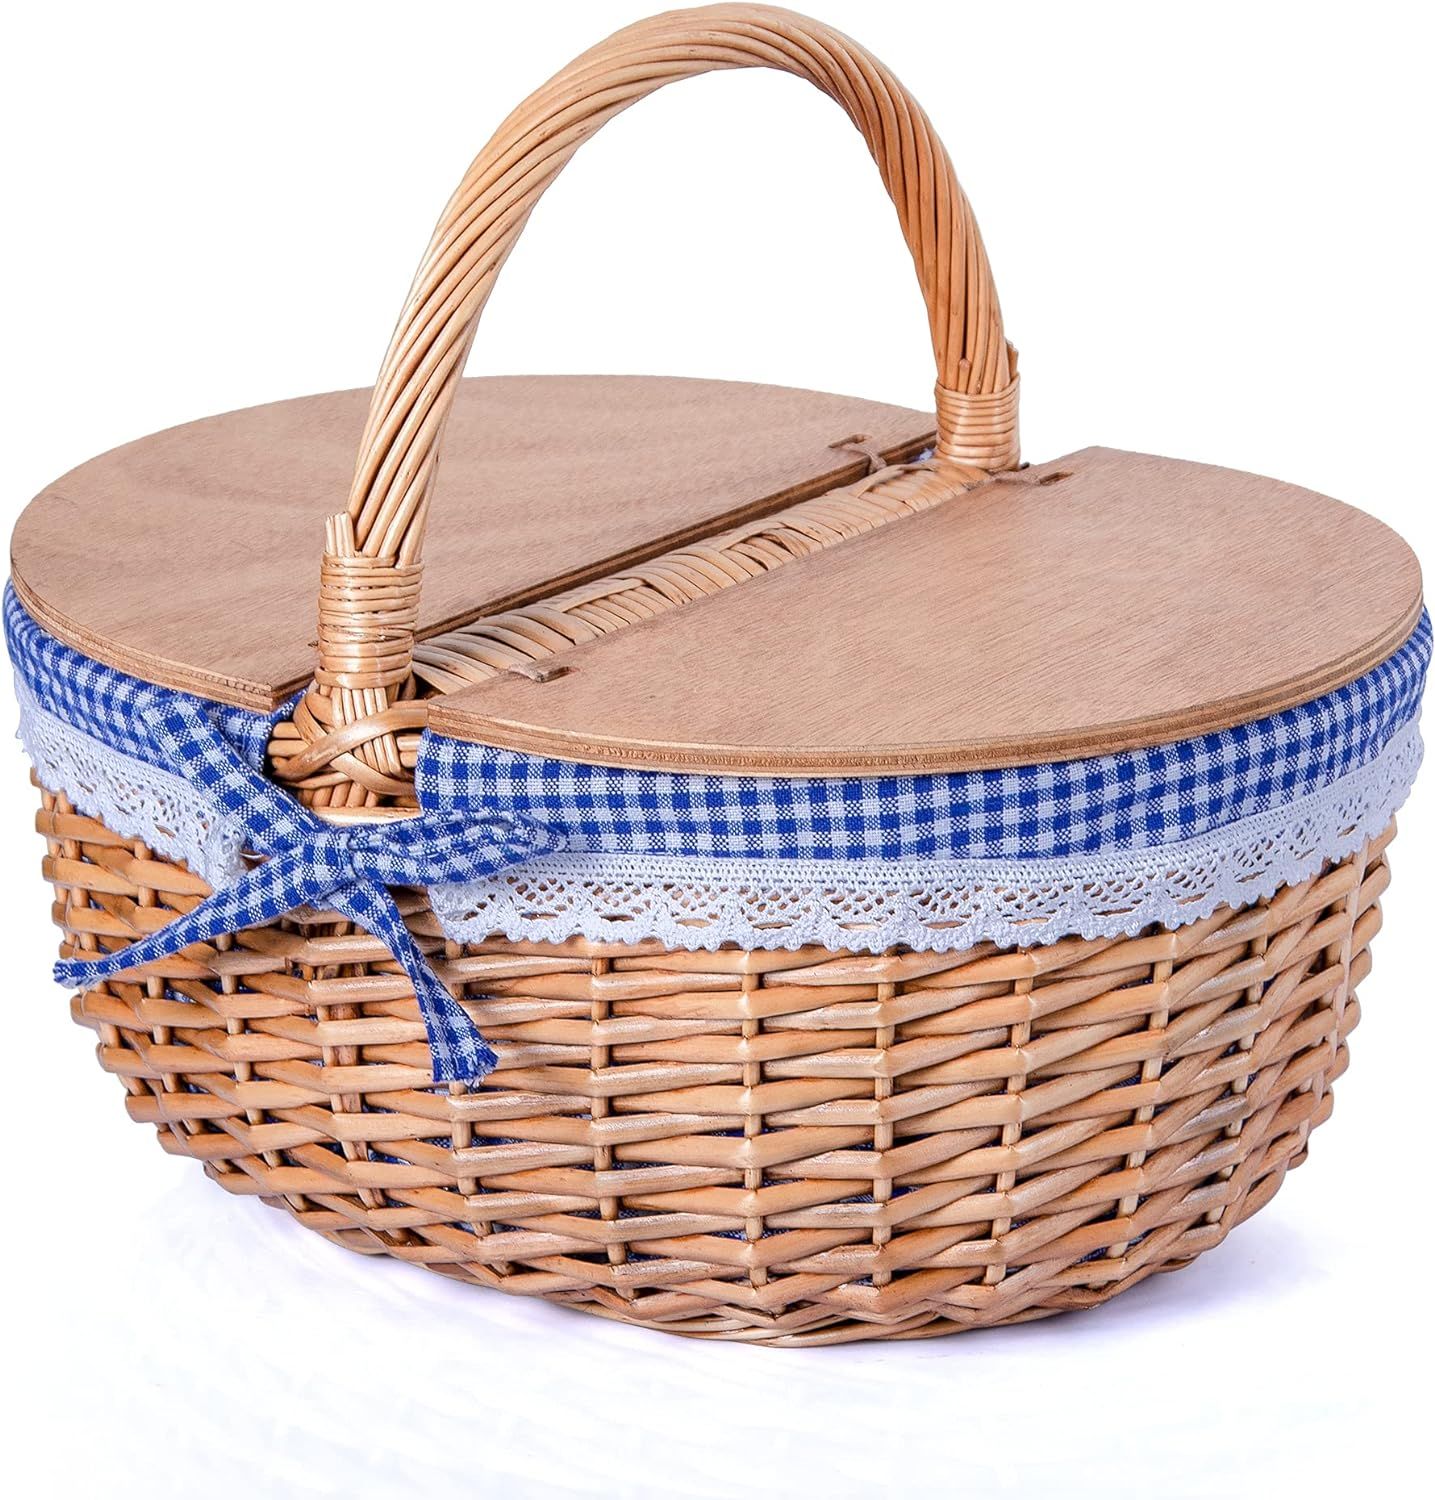 SatisInside Wicker Picnic Basket with Wooden Lids and Washable Liner - Stationary Handle - Blue | Amazon (US)